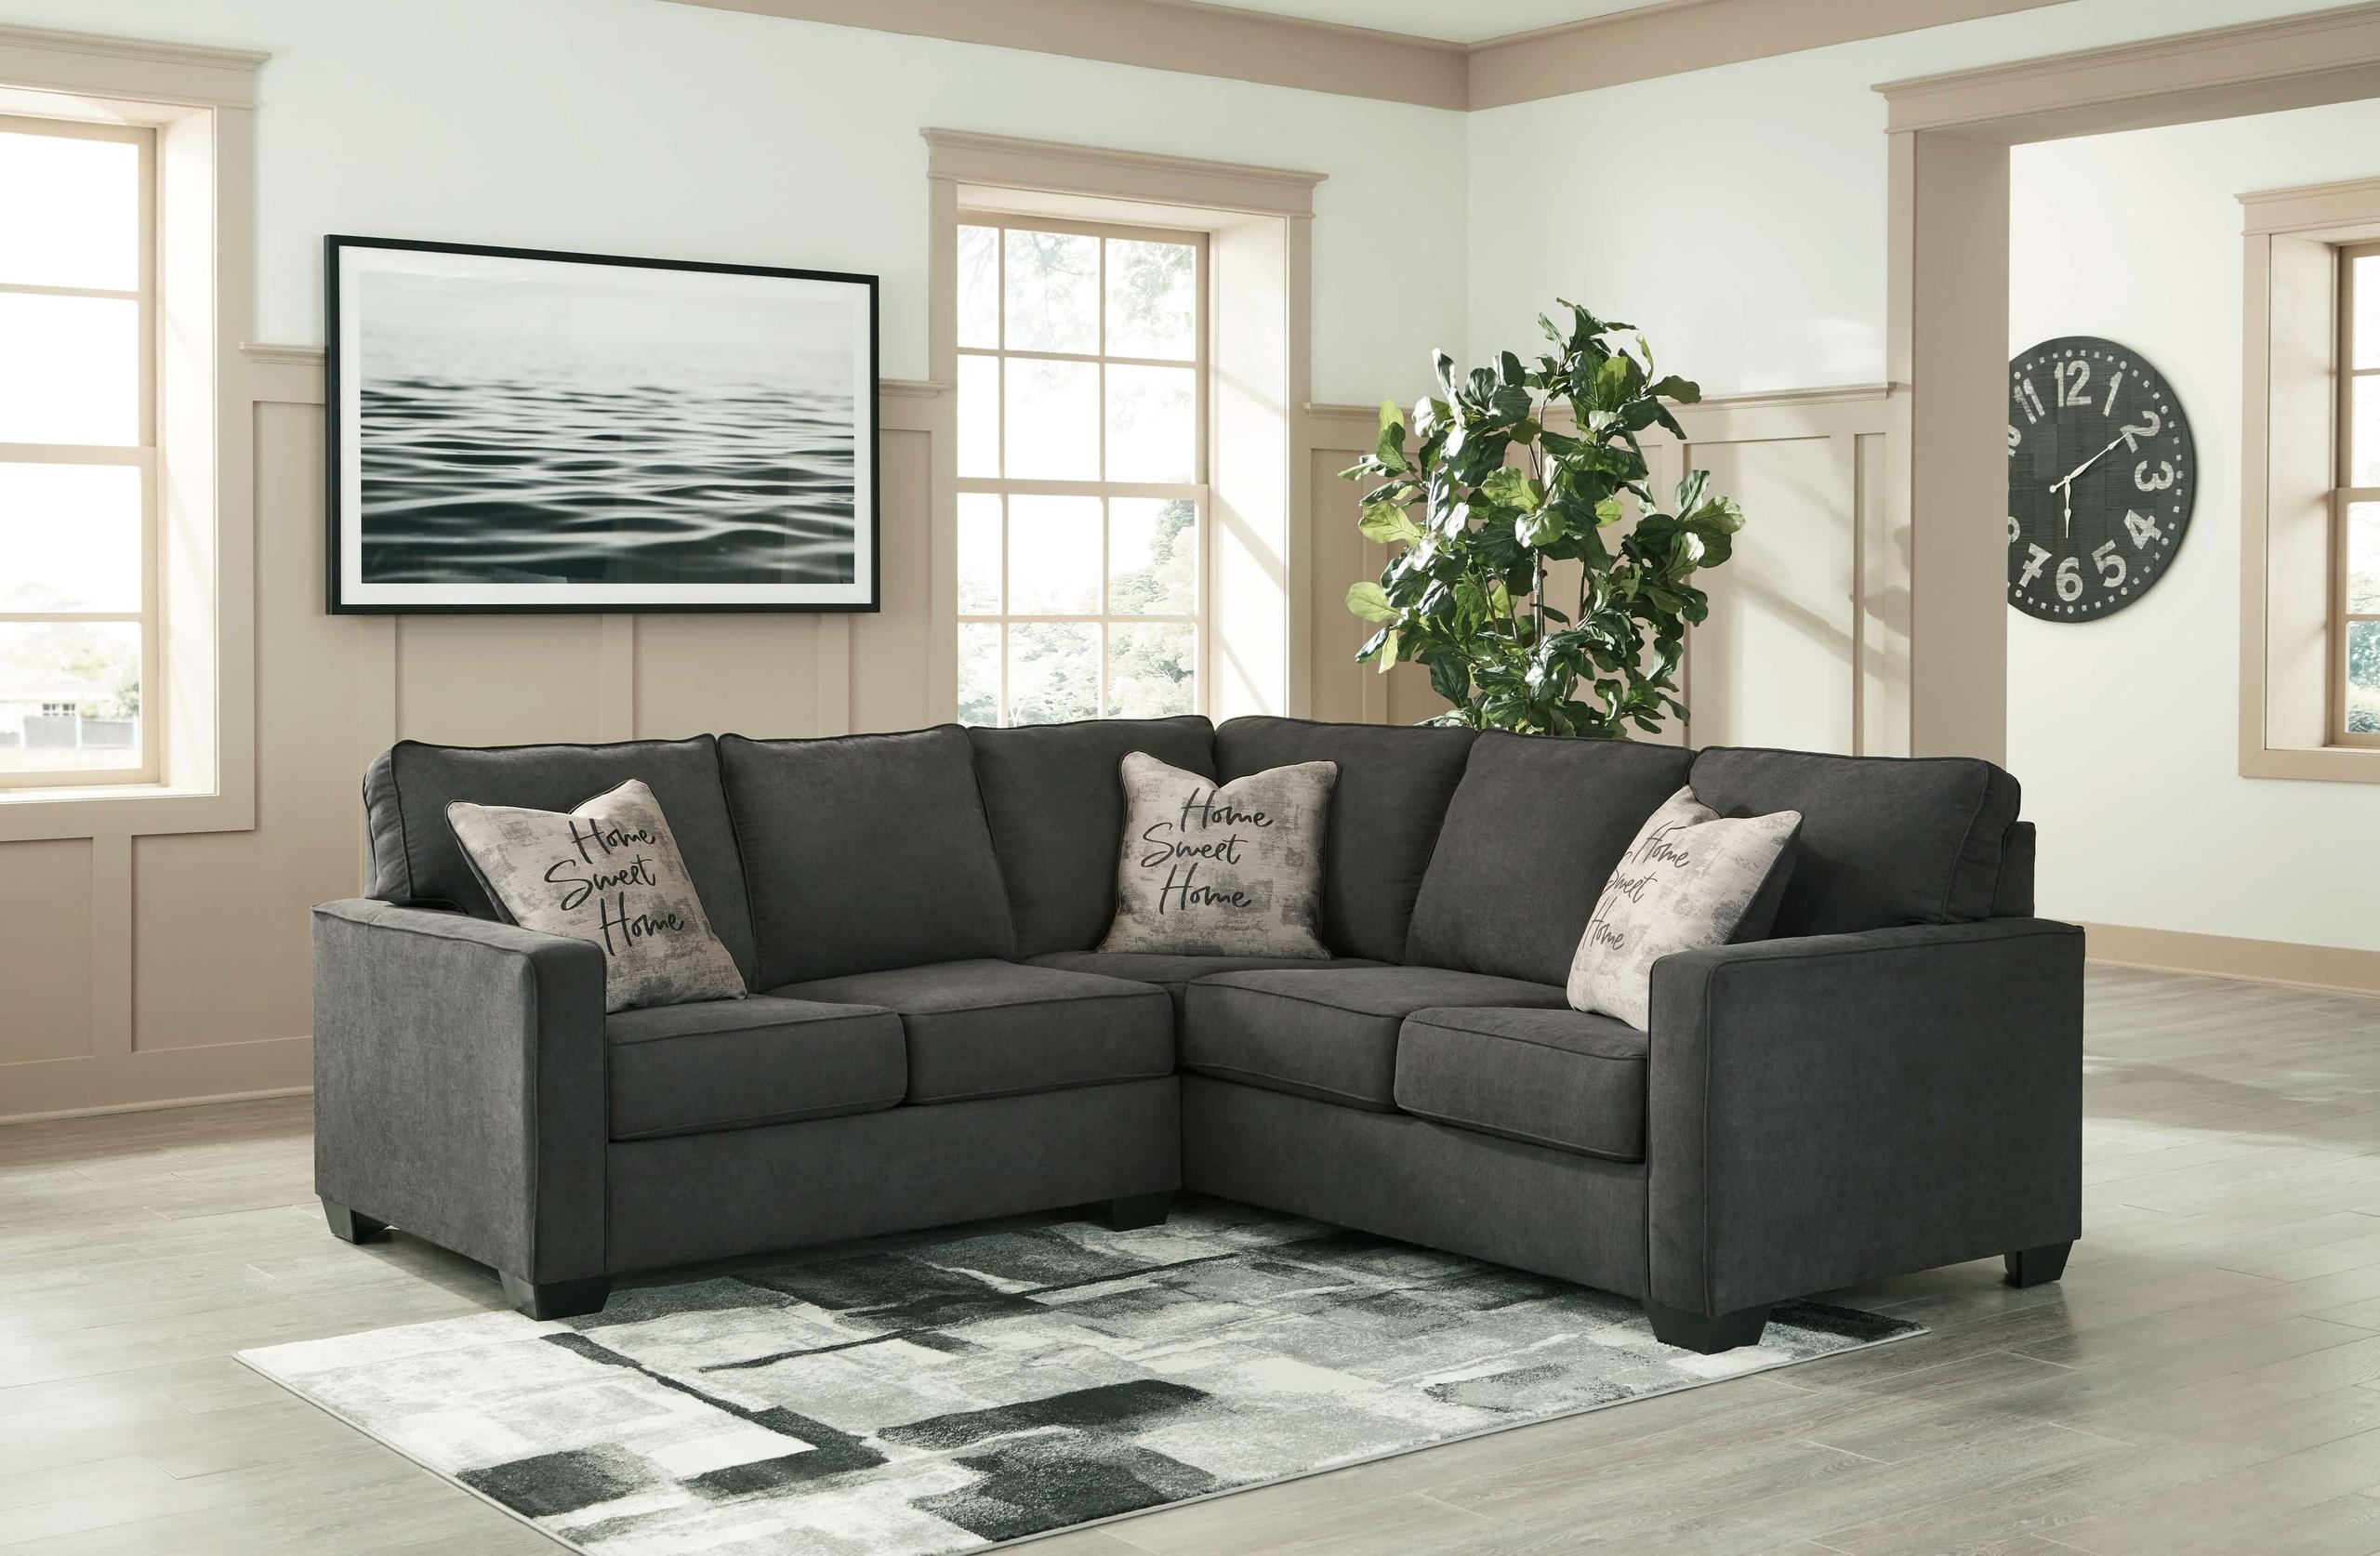 ASHLEY FURNITURE 59005S2 Lucina 2-piece Sectional